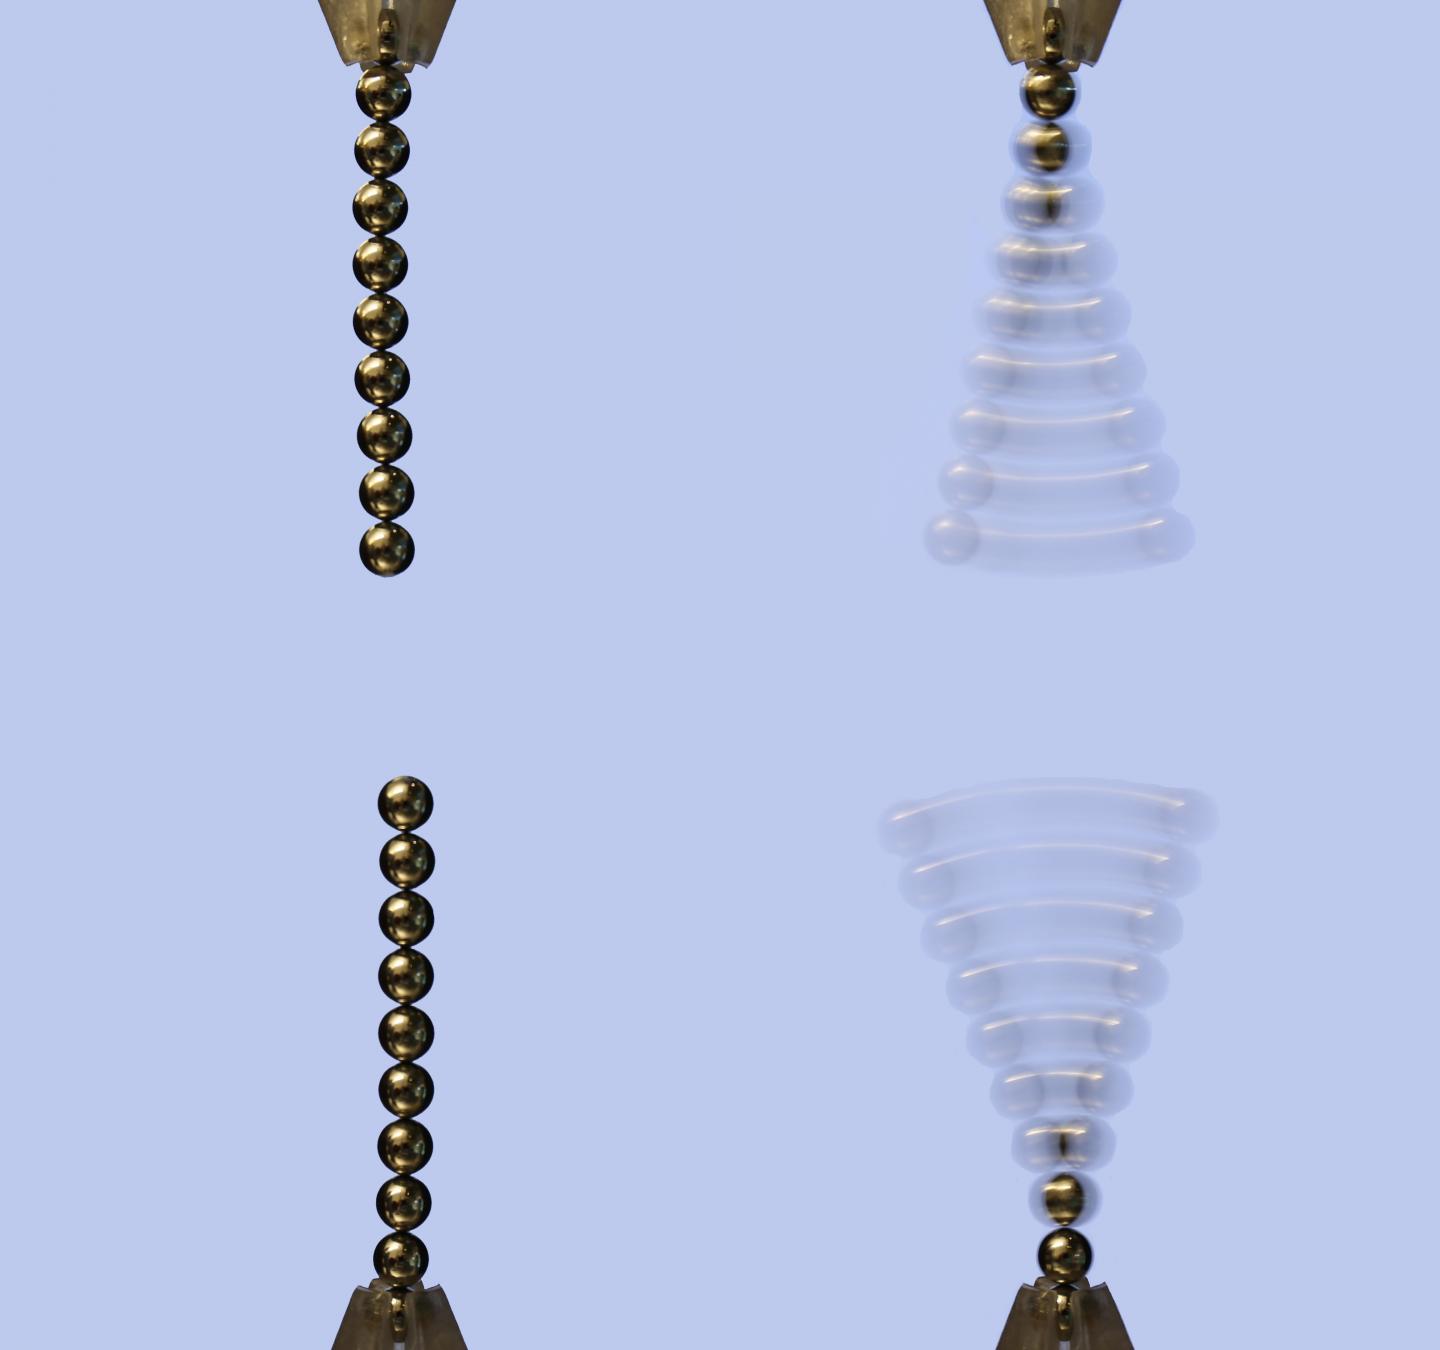 Pairs of Fixed Chains with a Gap in Between